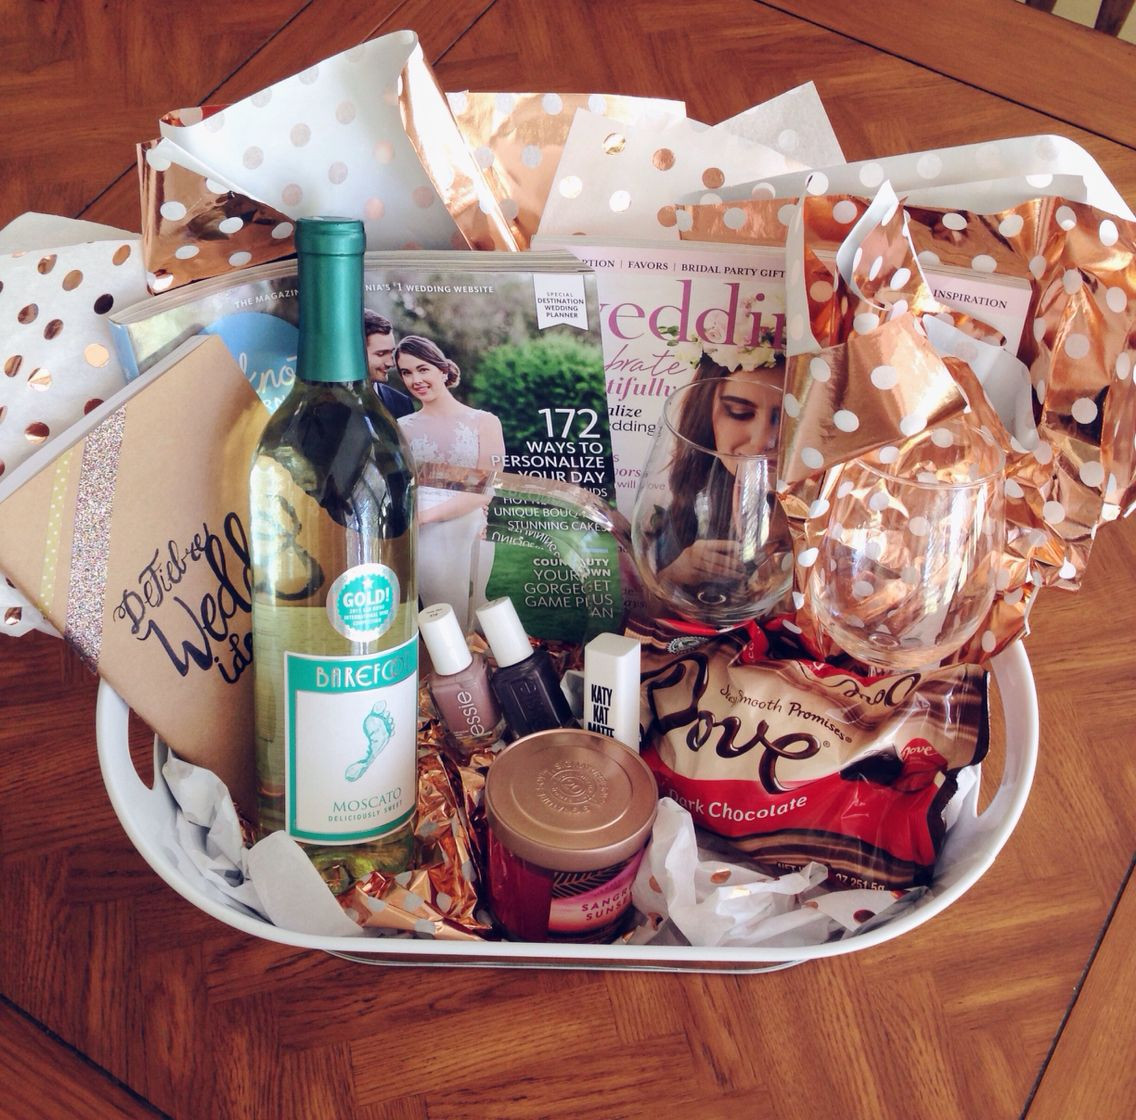 Wedding Gift Ideas For Friends Who Have Everything
 Engagement Gift Basket Survival Kit Everything your